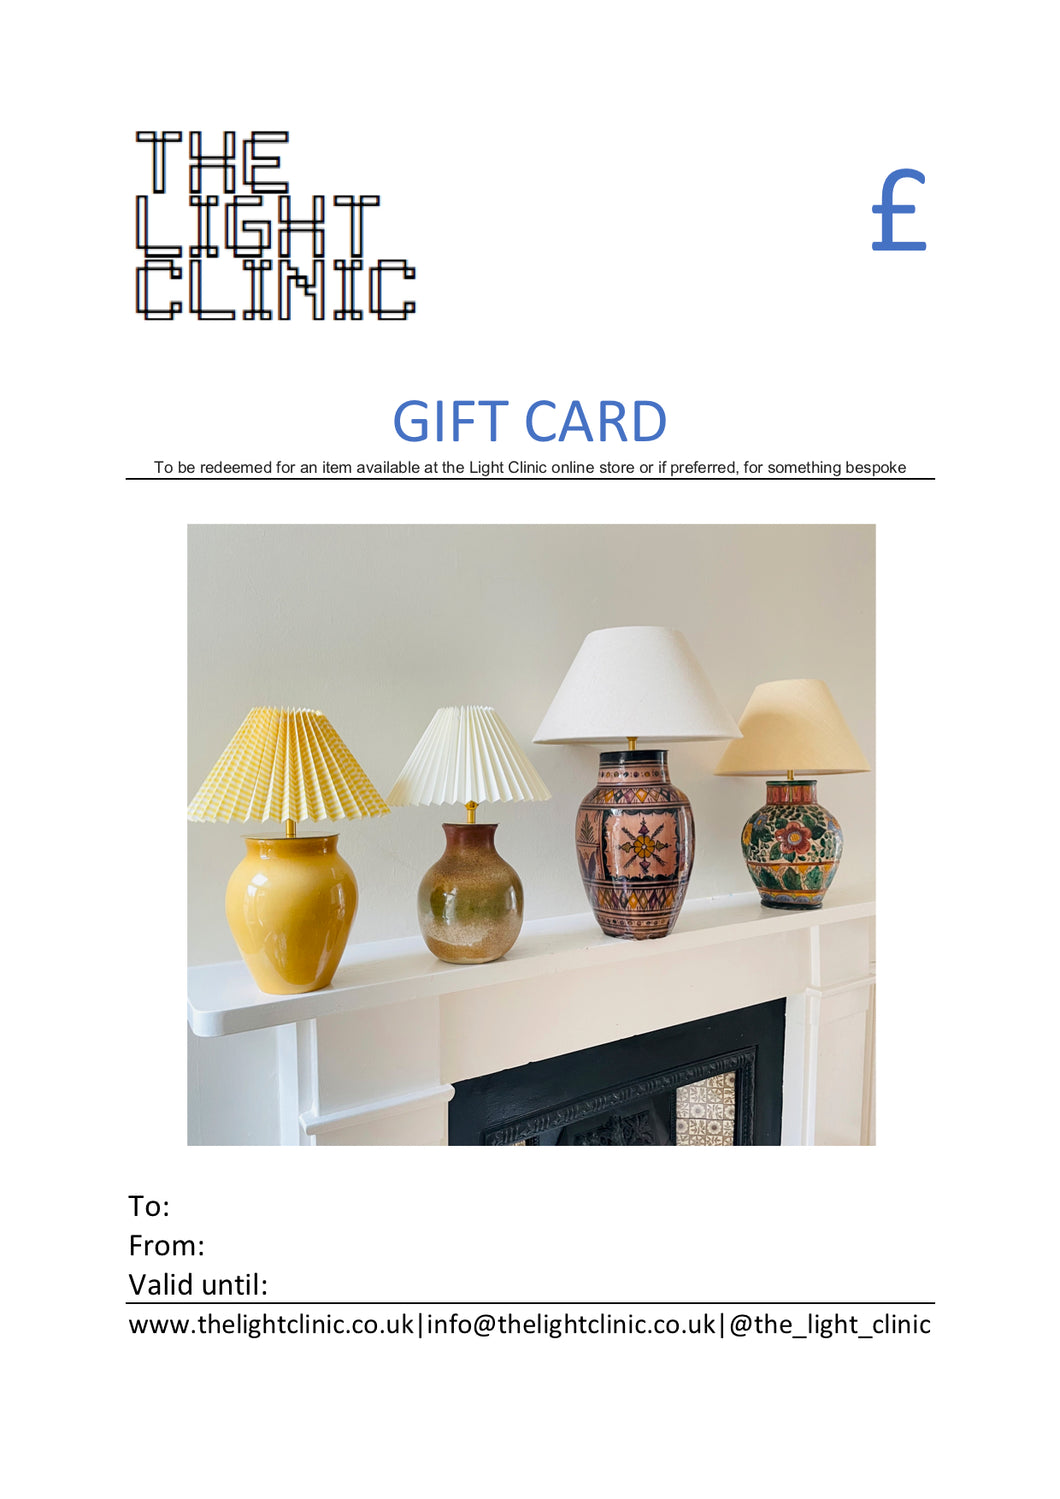 The Light Clinic Gift Card